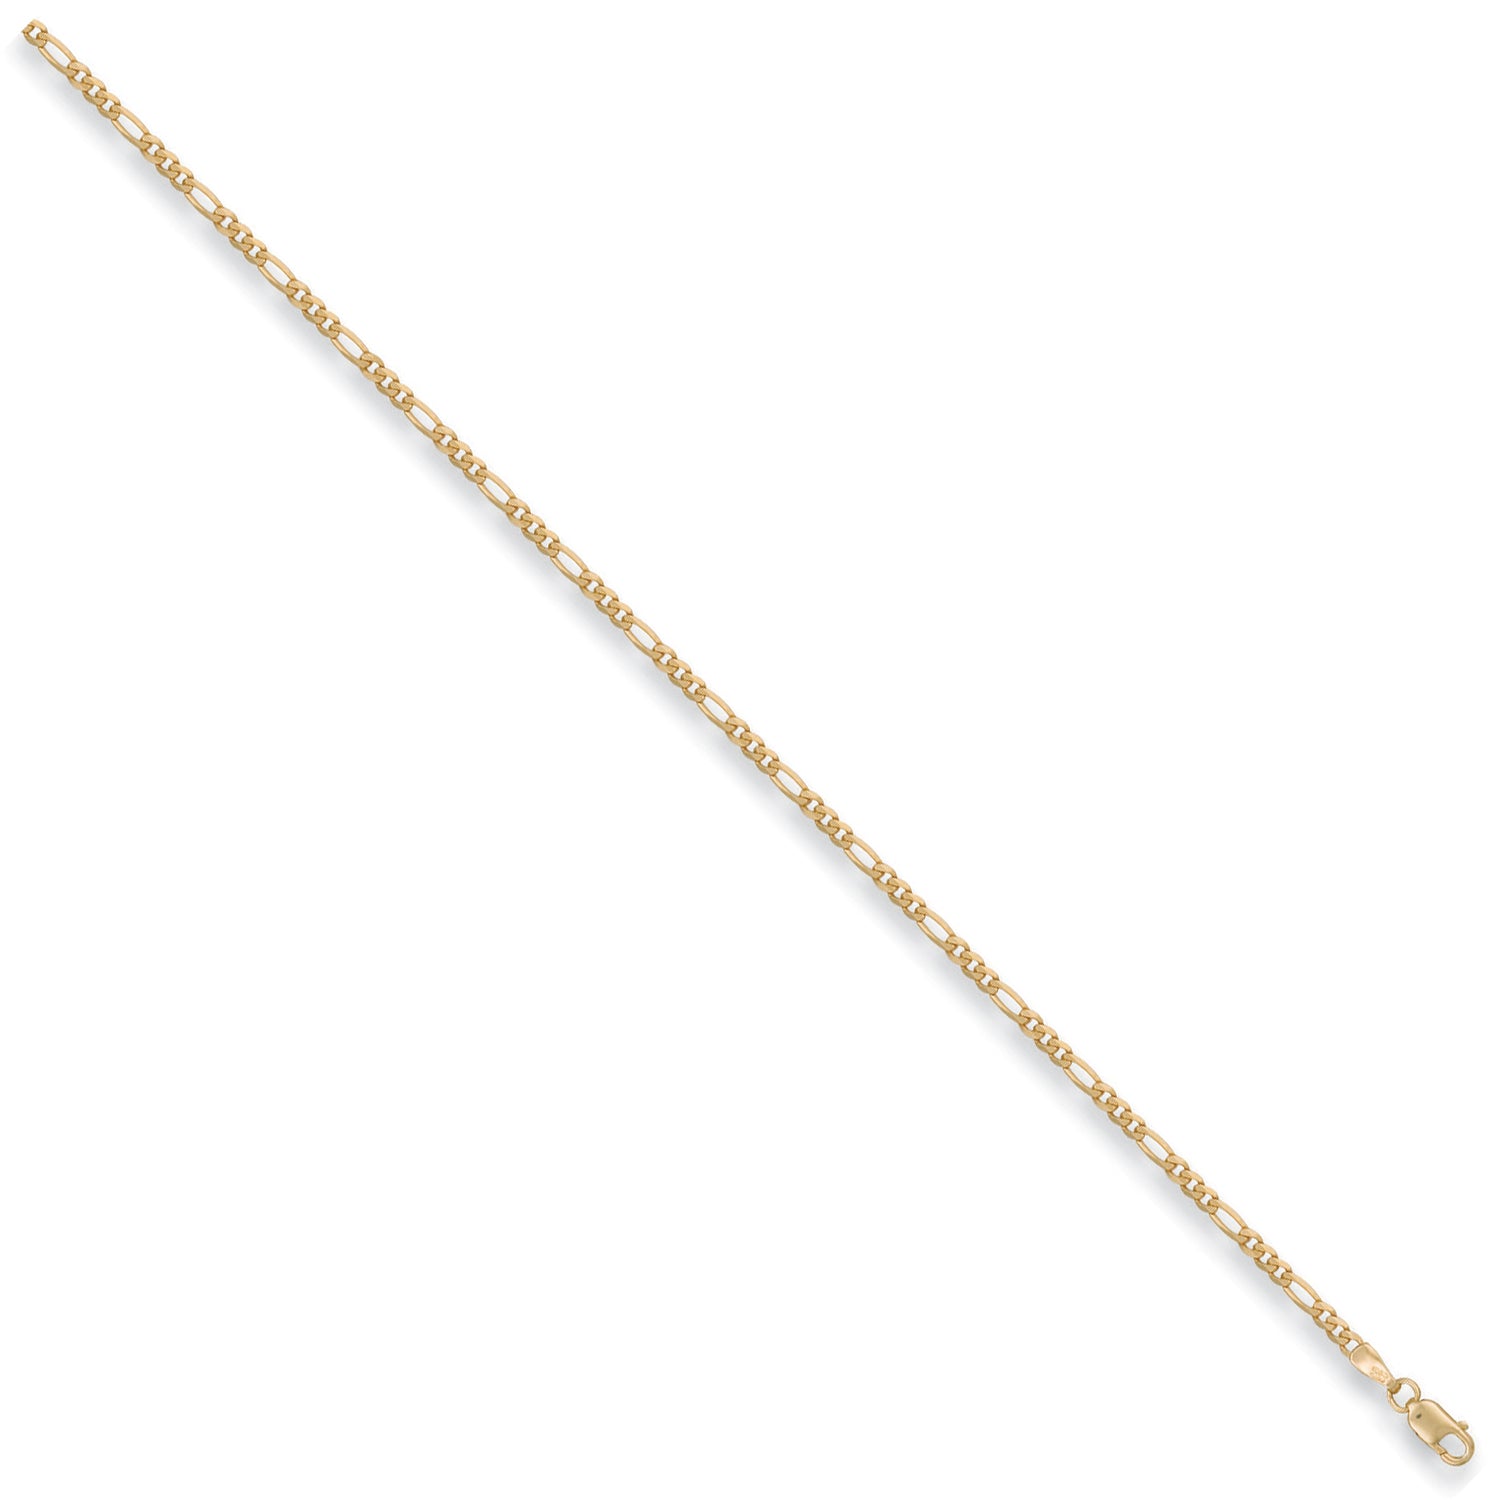 2.2mm 9ct solid Gold Figaro Link Chain | 16" - 24"